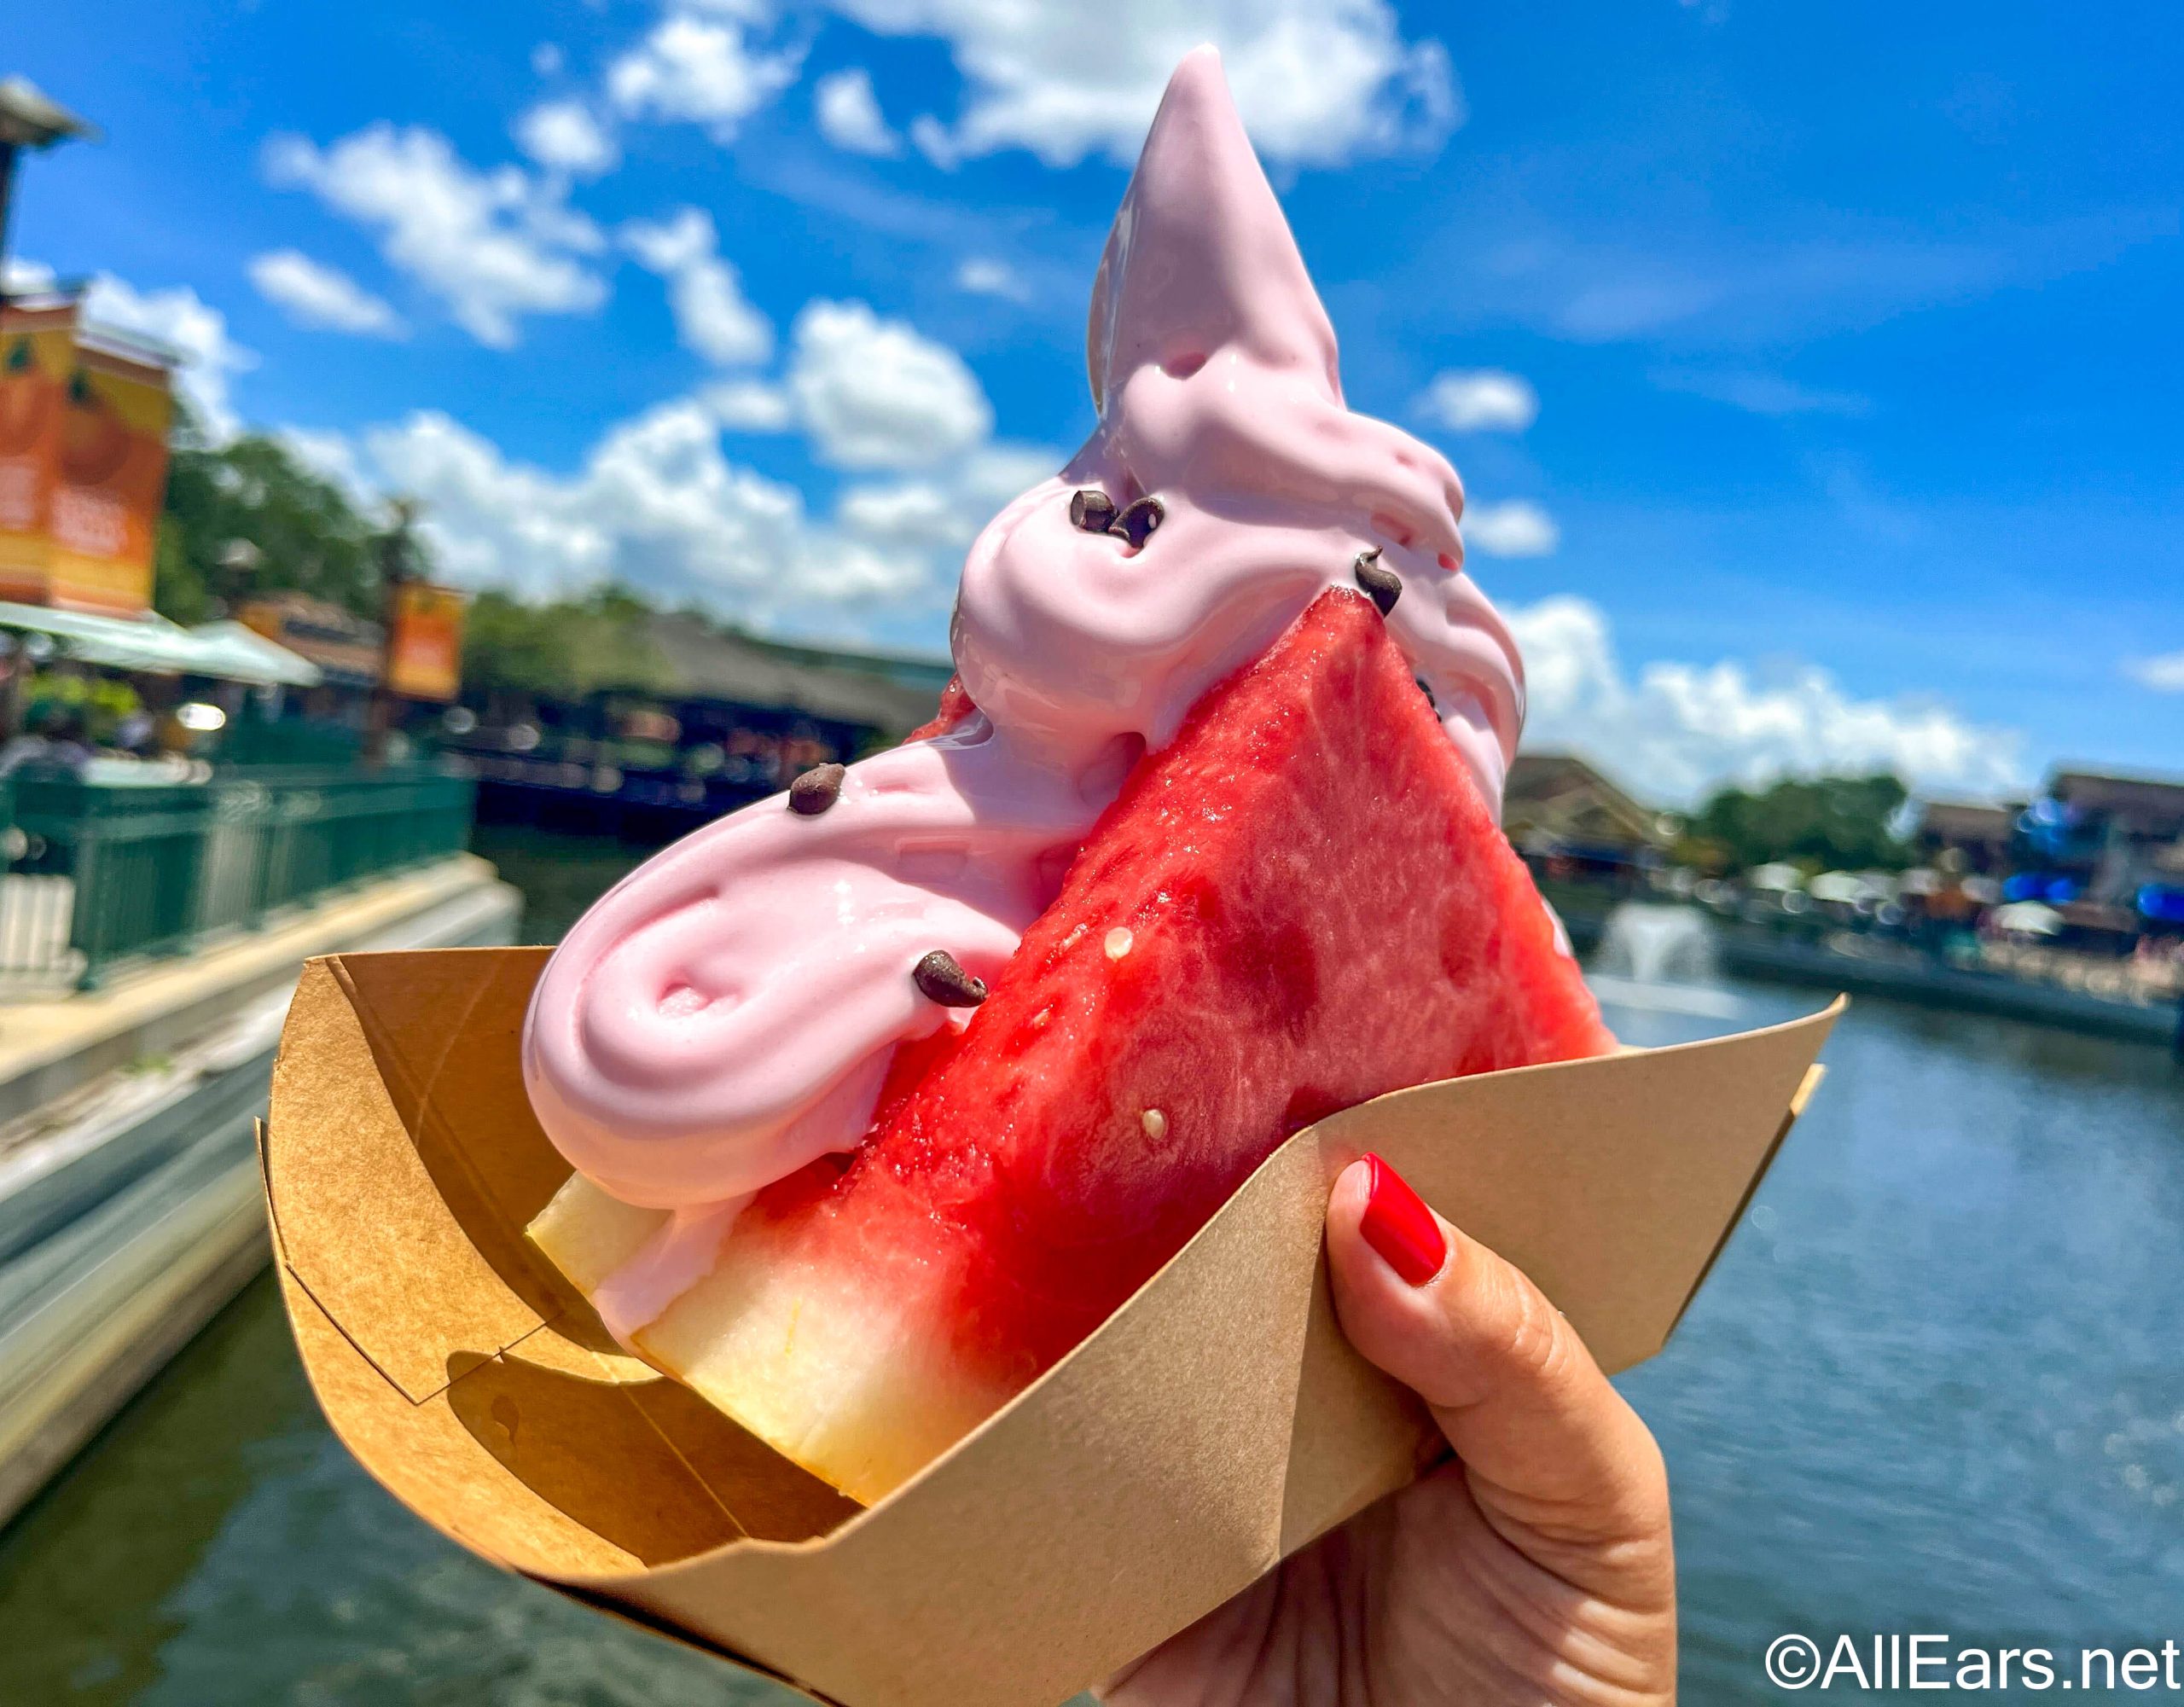 Over 40 Disney World Menu Updates You Don't Want to Miss! - AllEars.Net